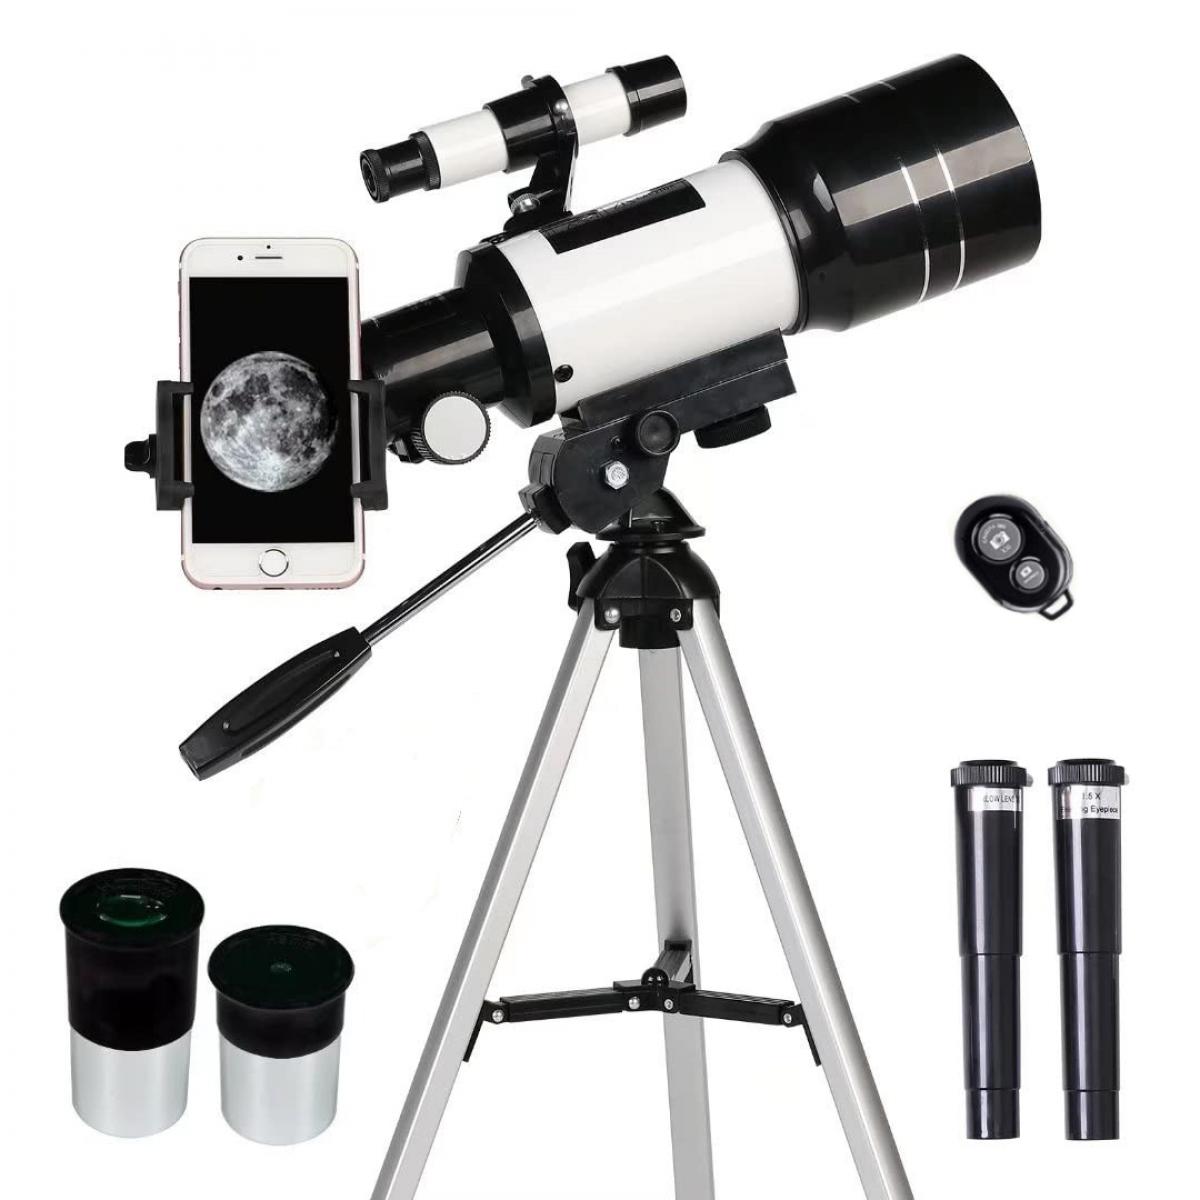 S SMAUTOP Telescope 70mm Portable Astronomical Telescope with Tripod Mobile Phone Holder Backpack for Kids Beginners Fully Multi-Coated Optics Astronomy Refractor Travel Scope Tripod Phone Adapter 